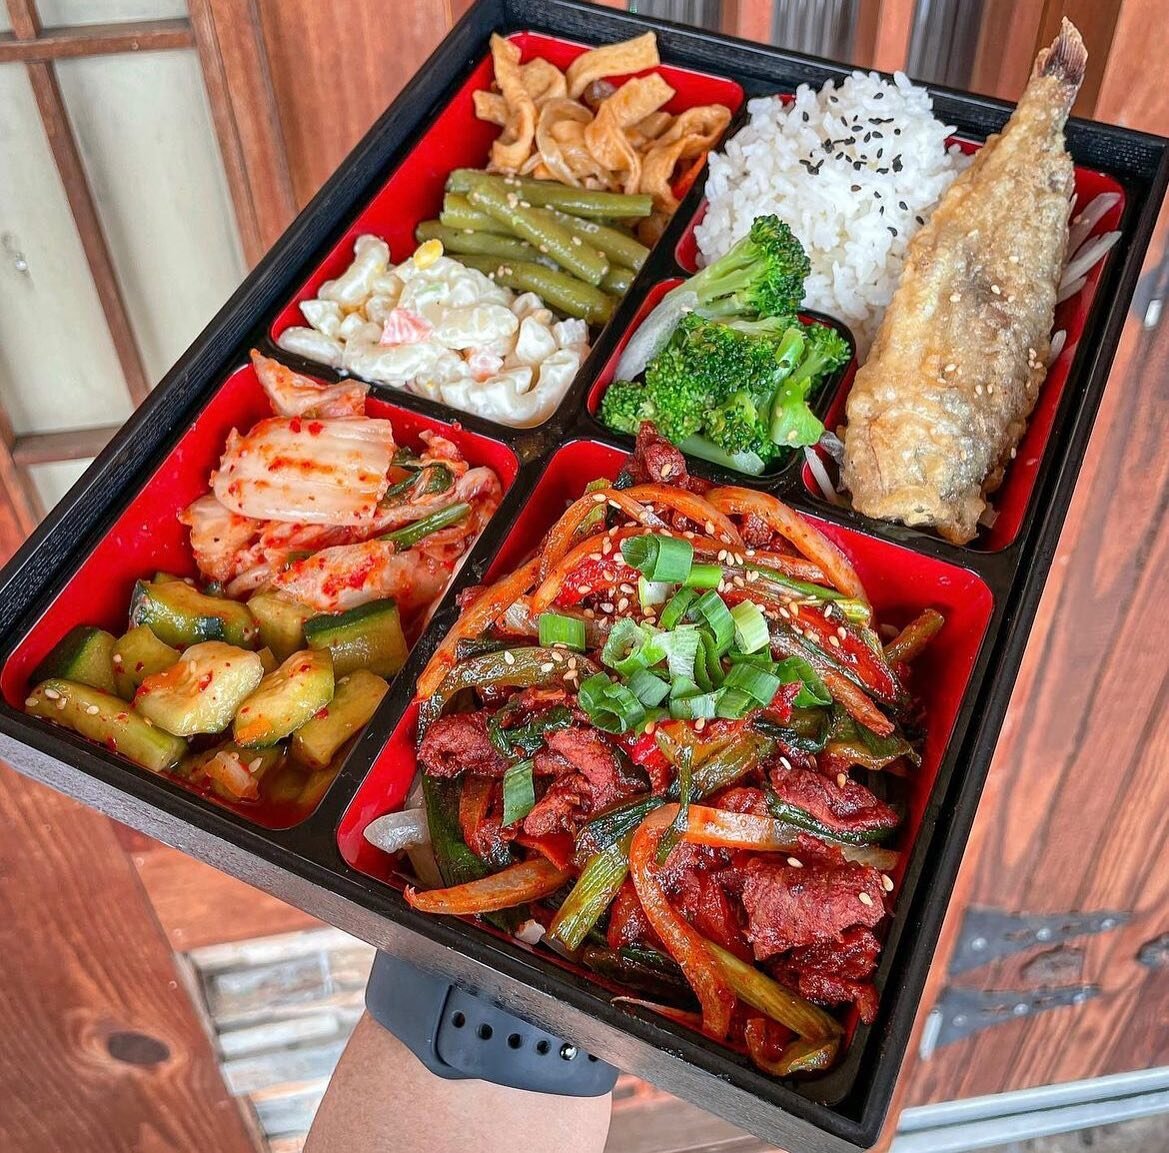 Got a fave lunch spot or special? Ours is this Lunch Bento Box from @luckypalacehouston 😍 Let us know yours in the comments 👇😁

@bayoubuzz is a social media management company dedicated to Houston restaurants!

📲 Visit our website or DM us for mo